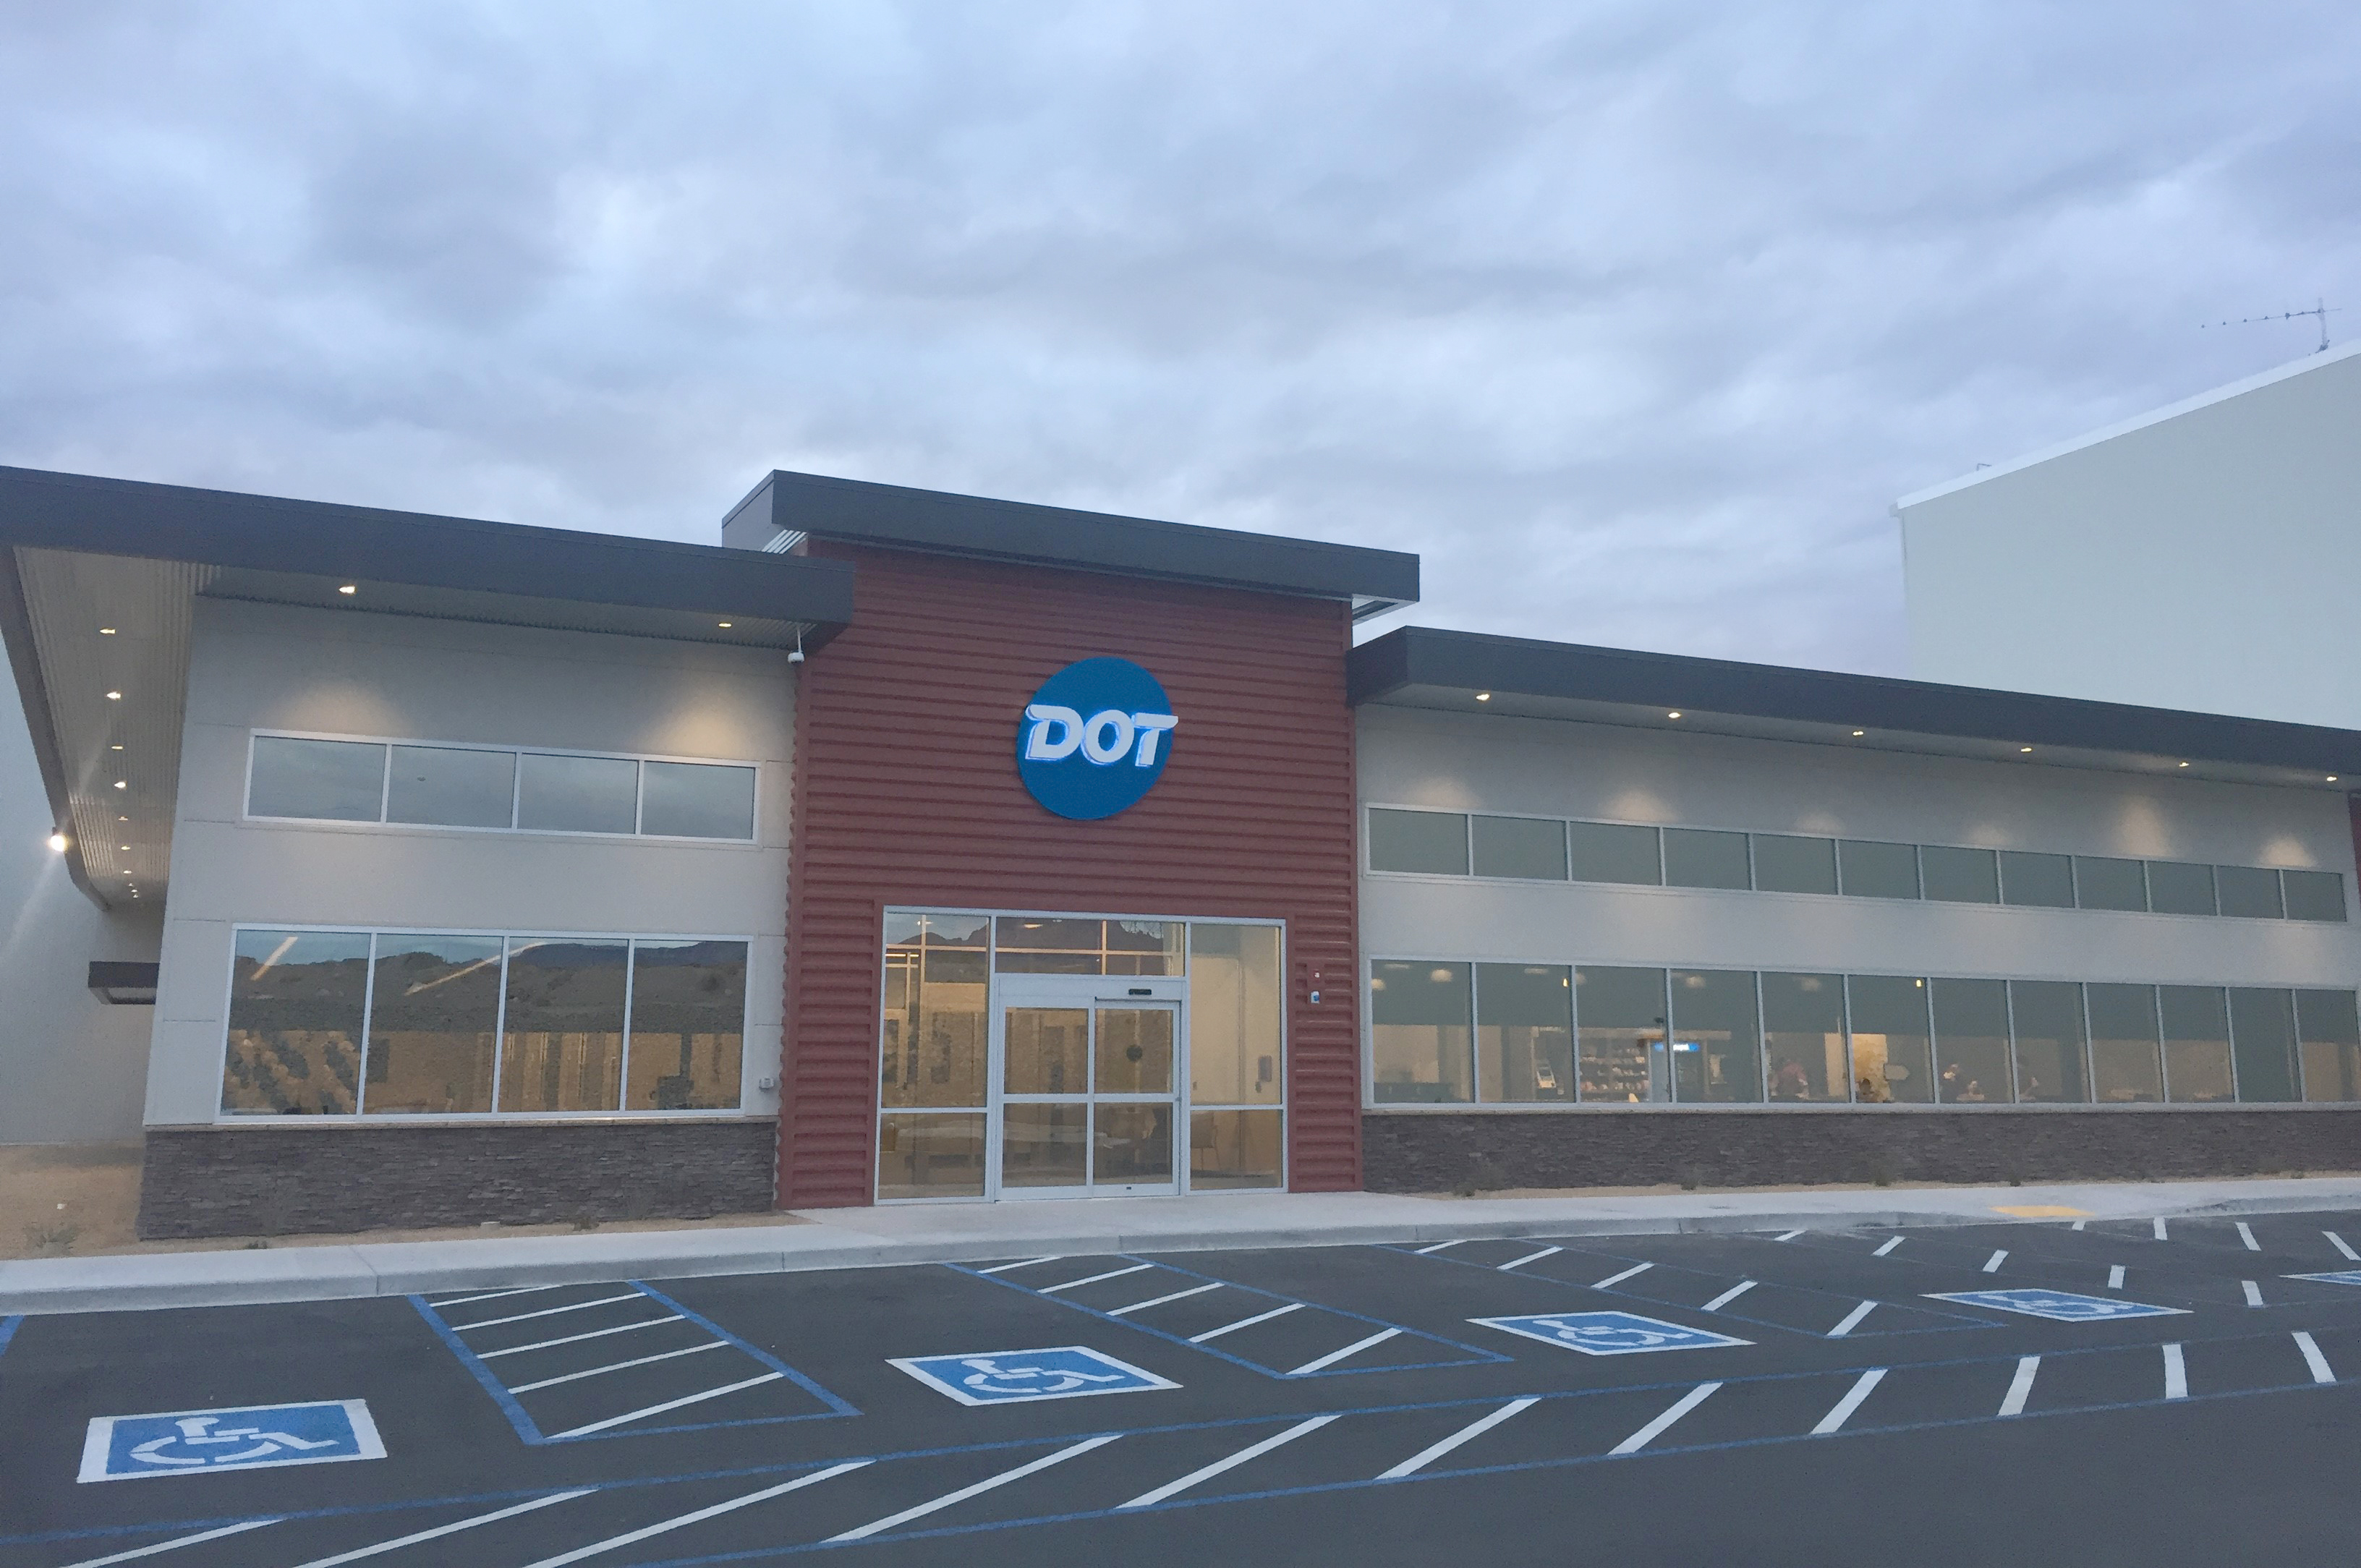 Dot Foods uses any-to-any data transformation technology to meet customers’ data demands